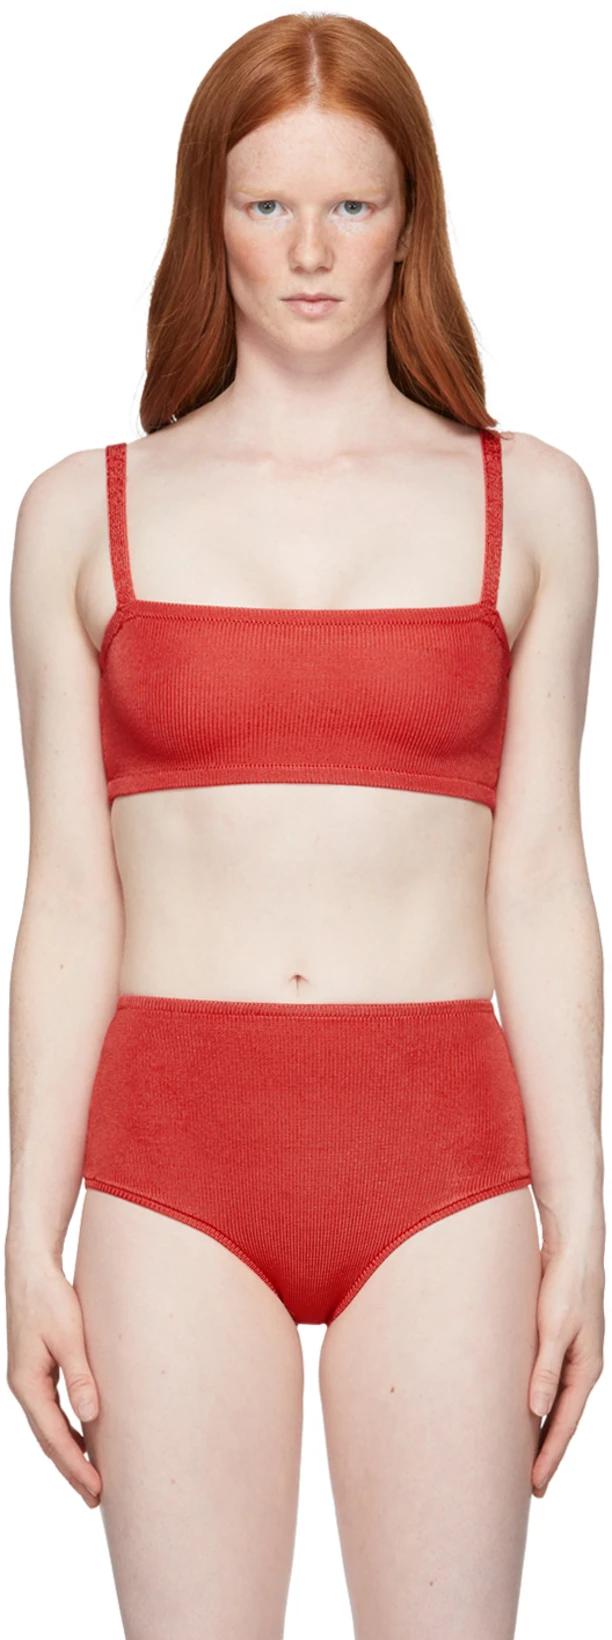 Red Knit Bandeau Bra by CALLE DEL MAR